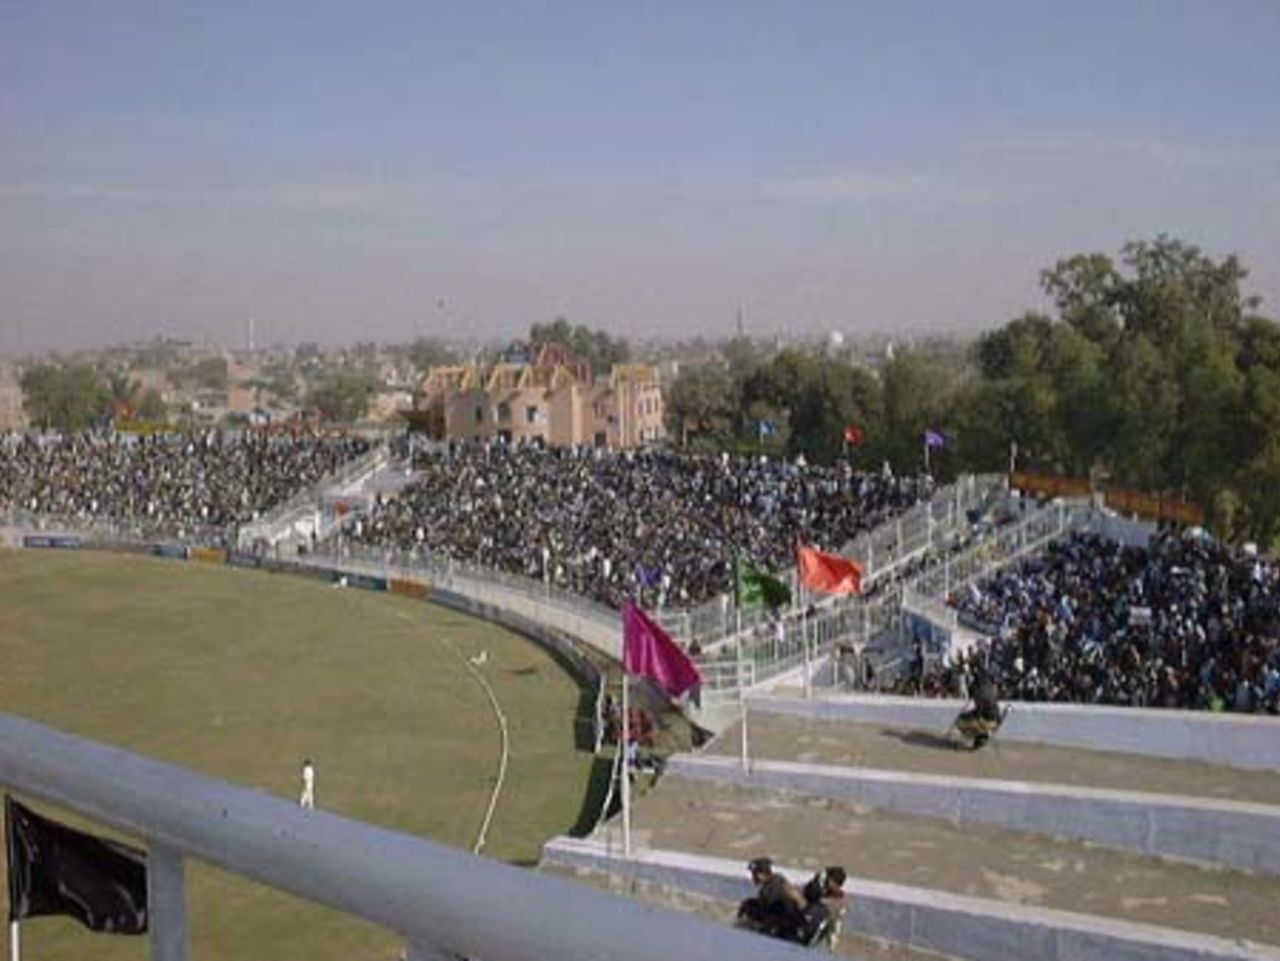 A view of the stands of Iqbal Stadium, Faisalabad, 2nd Test England v Pakistan, 29 Nov-3 Dec 2000